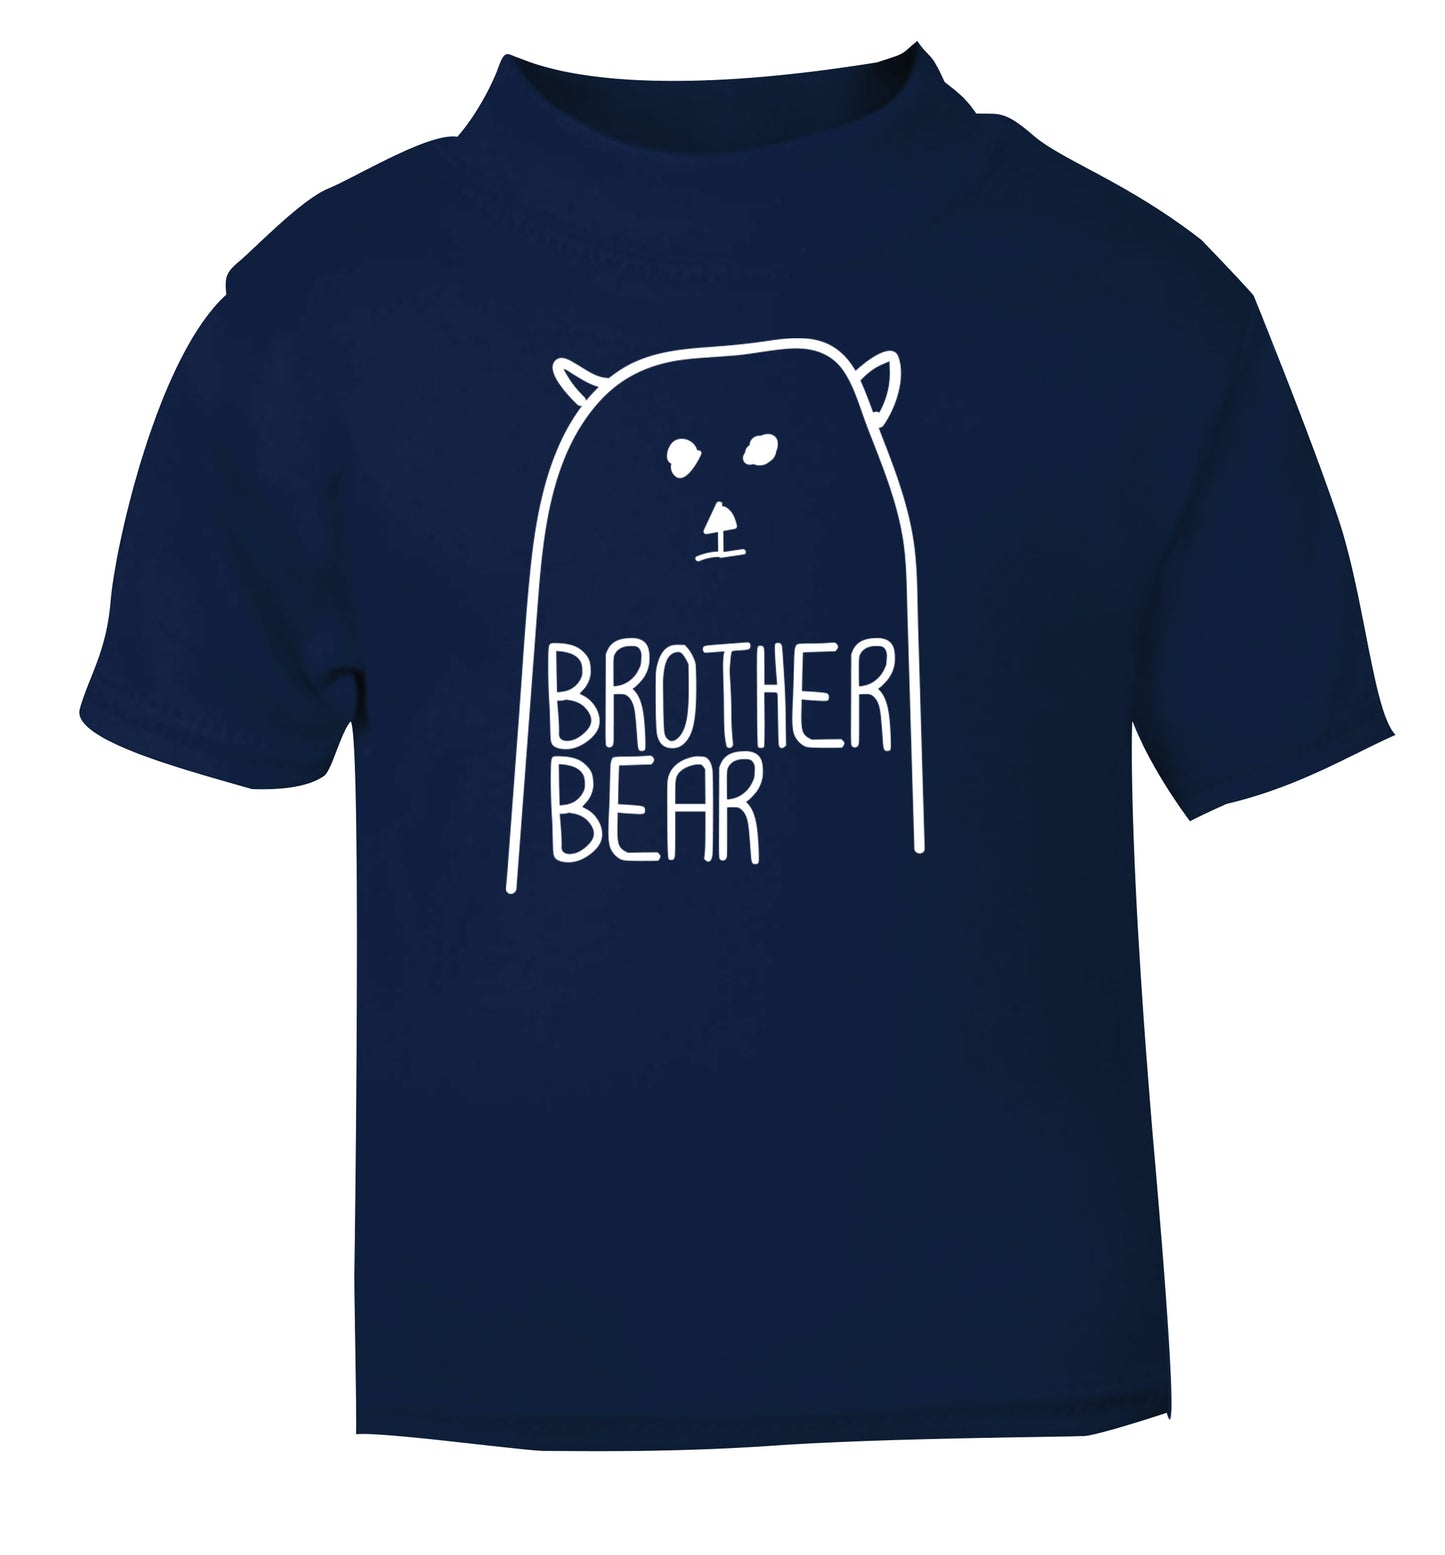 Brother bear navy Baby Toddler Tshirt 2 Years